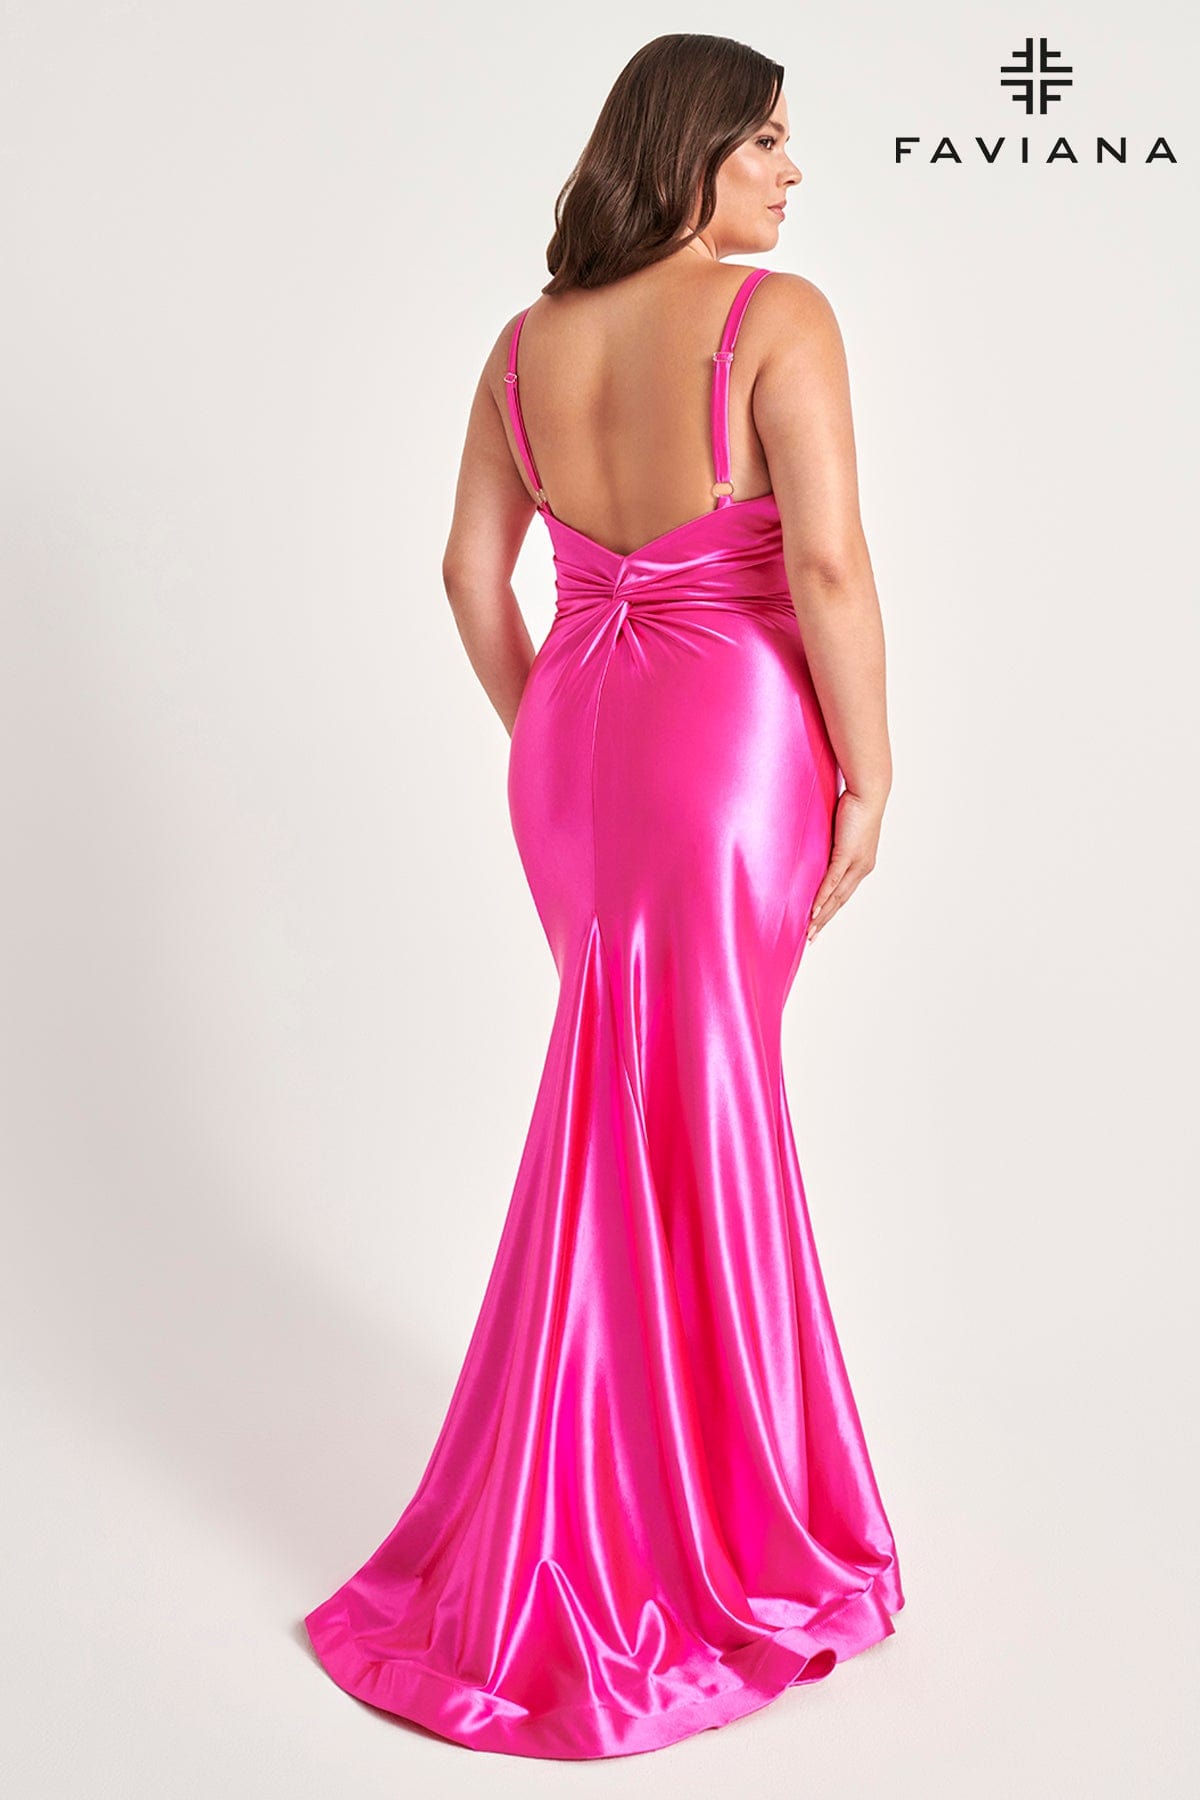 Stretch Satin Hot Pink Plus Size Prom Dress With Knot Detailing | 9549